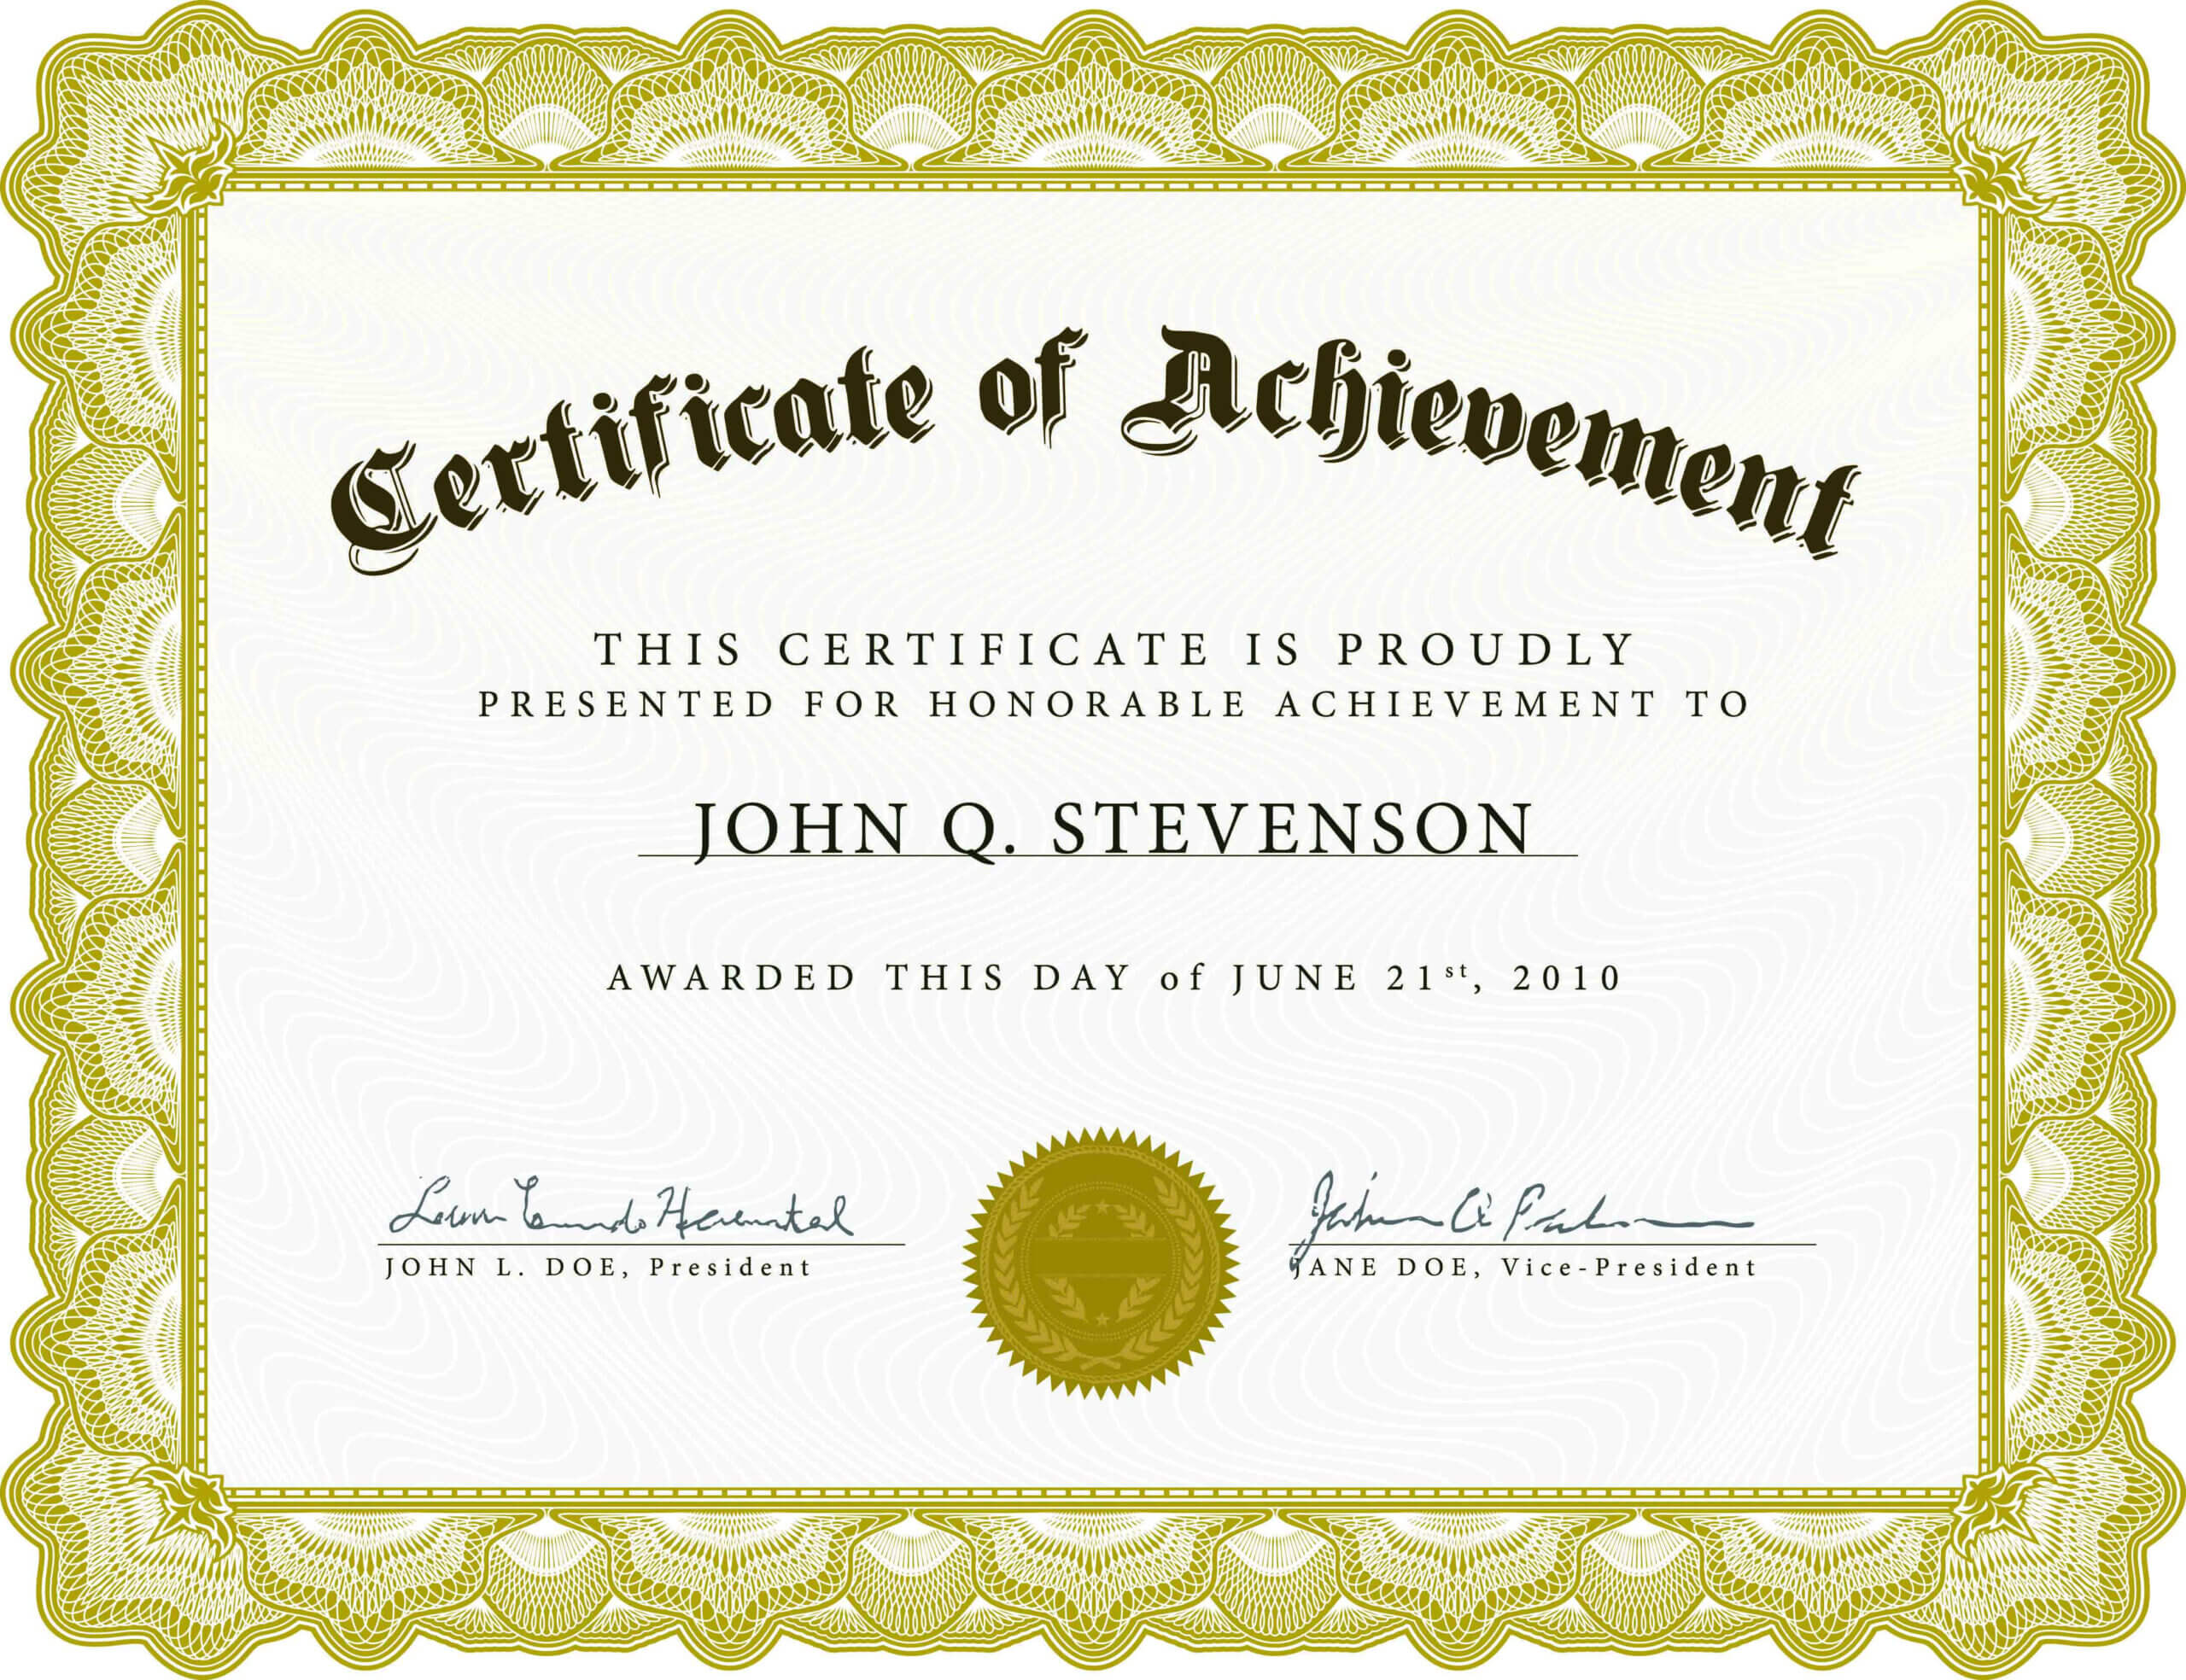 Certificate Of Academic Achievement Template | Photo Stock Regarding Certificate Of Completion Template Free Printable